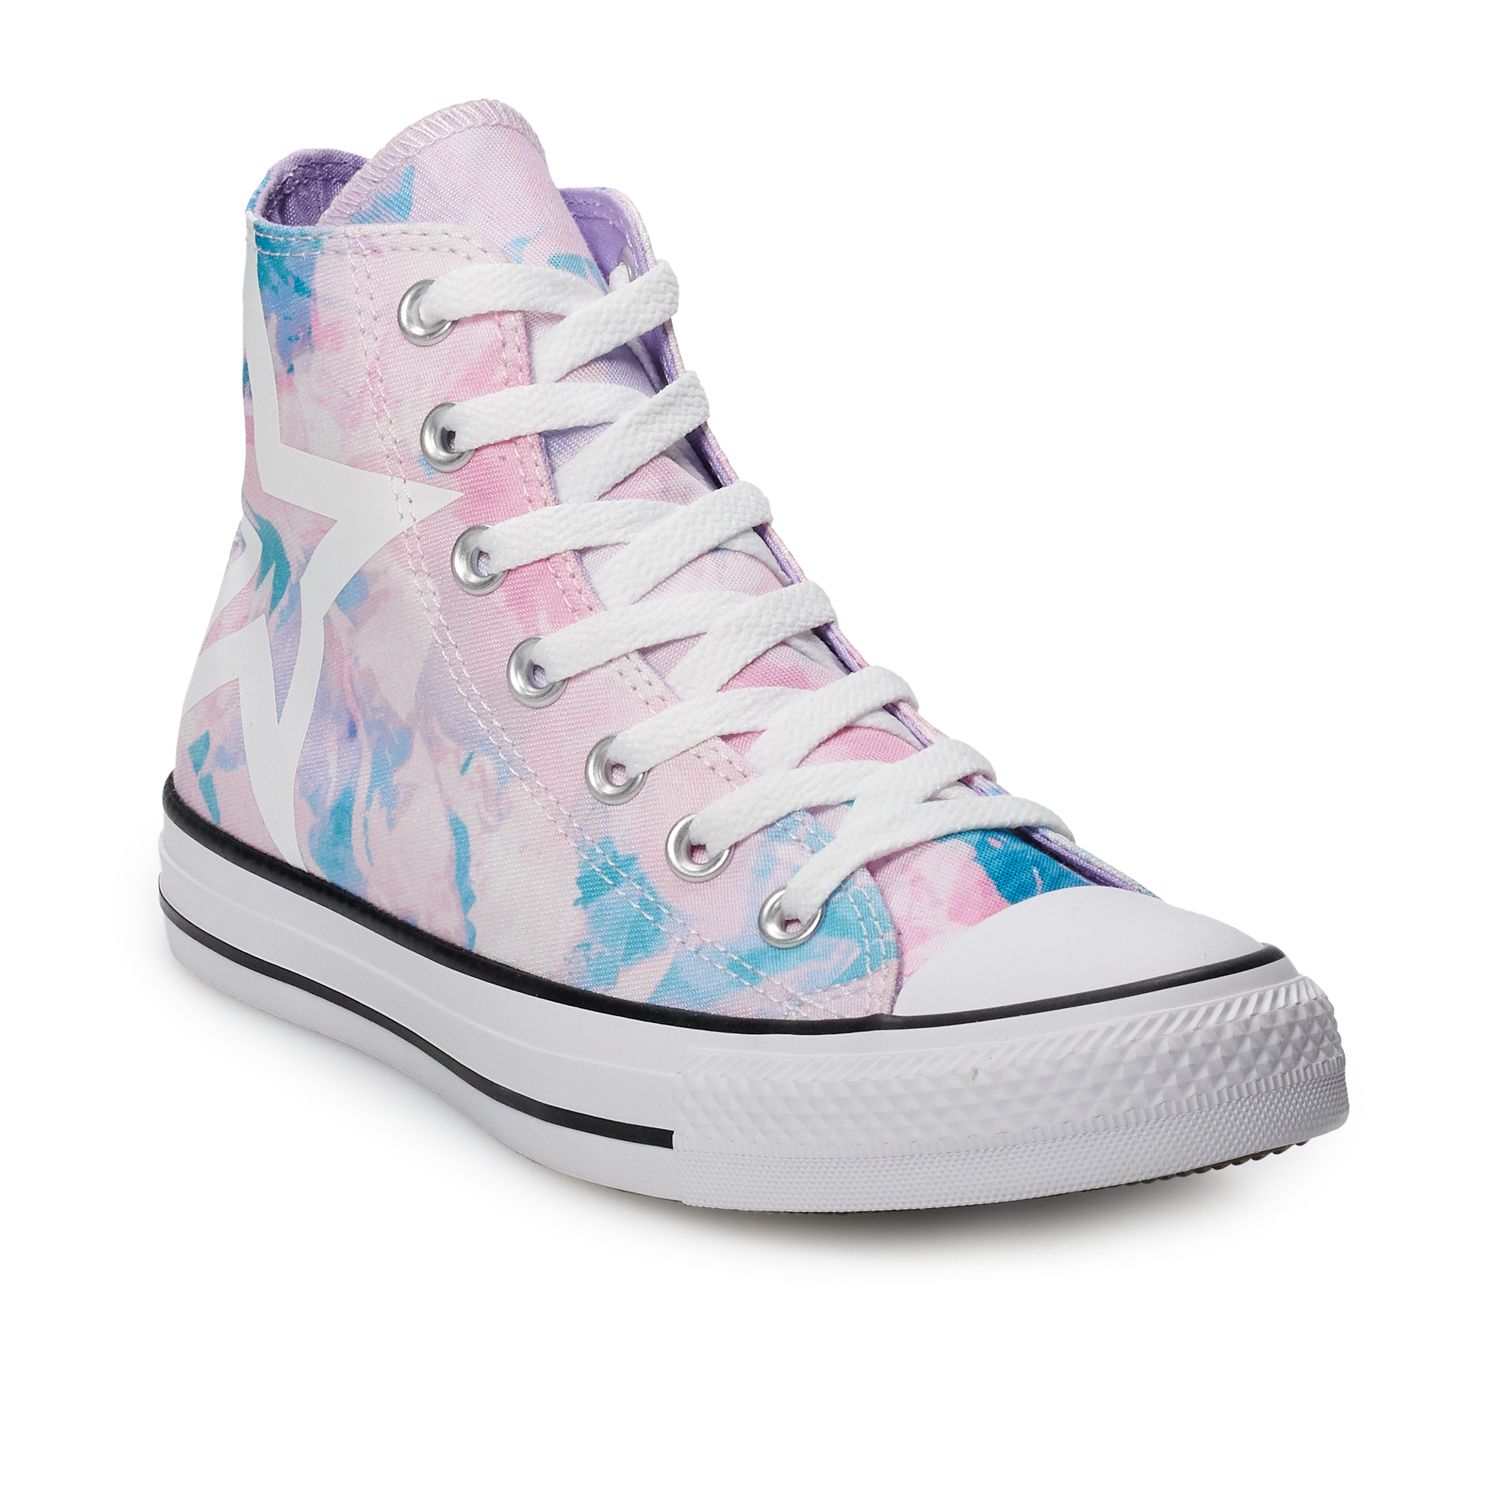 converse high tops with designs